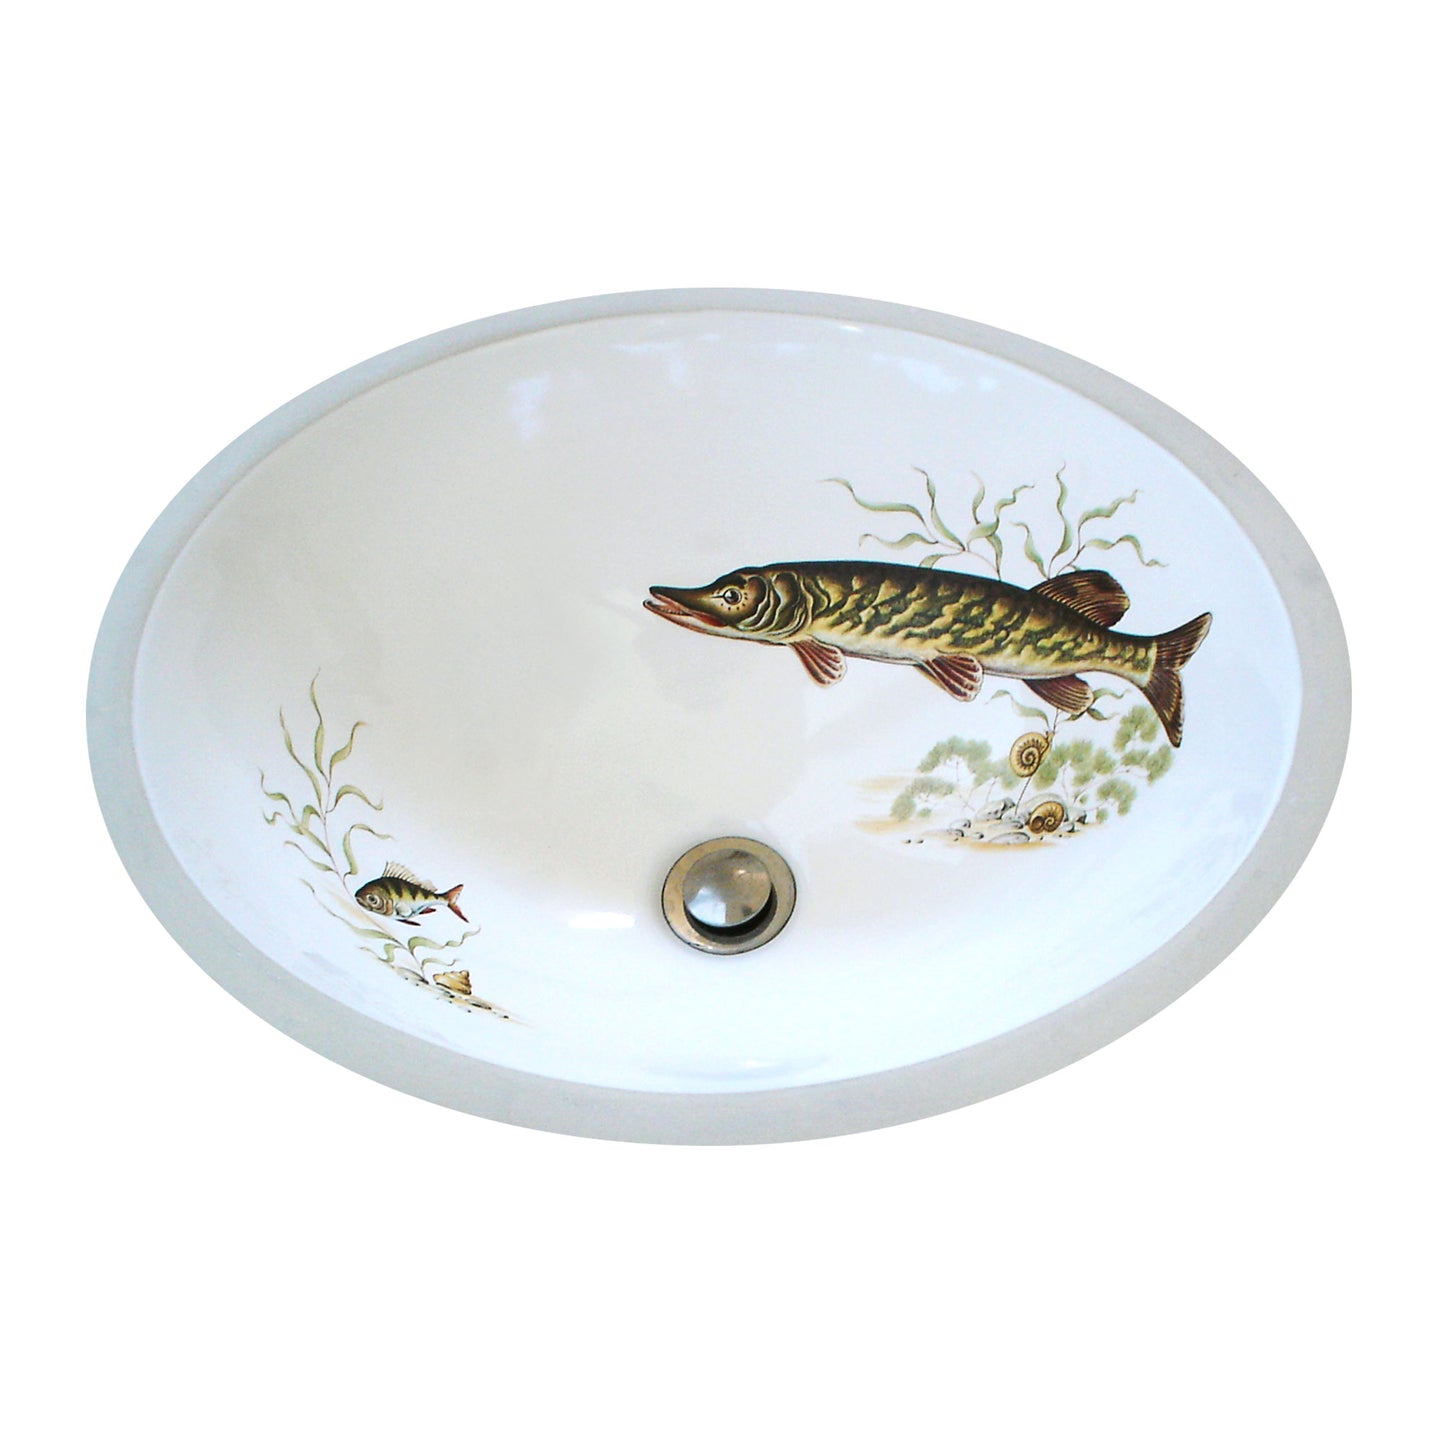 Bathroom sink for cabin or fisherman painted with muskie